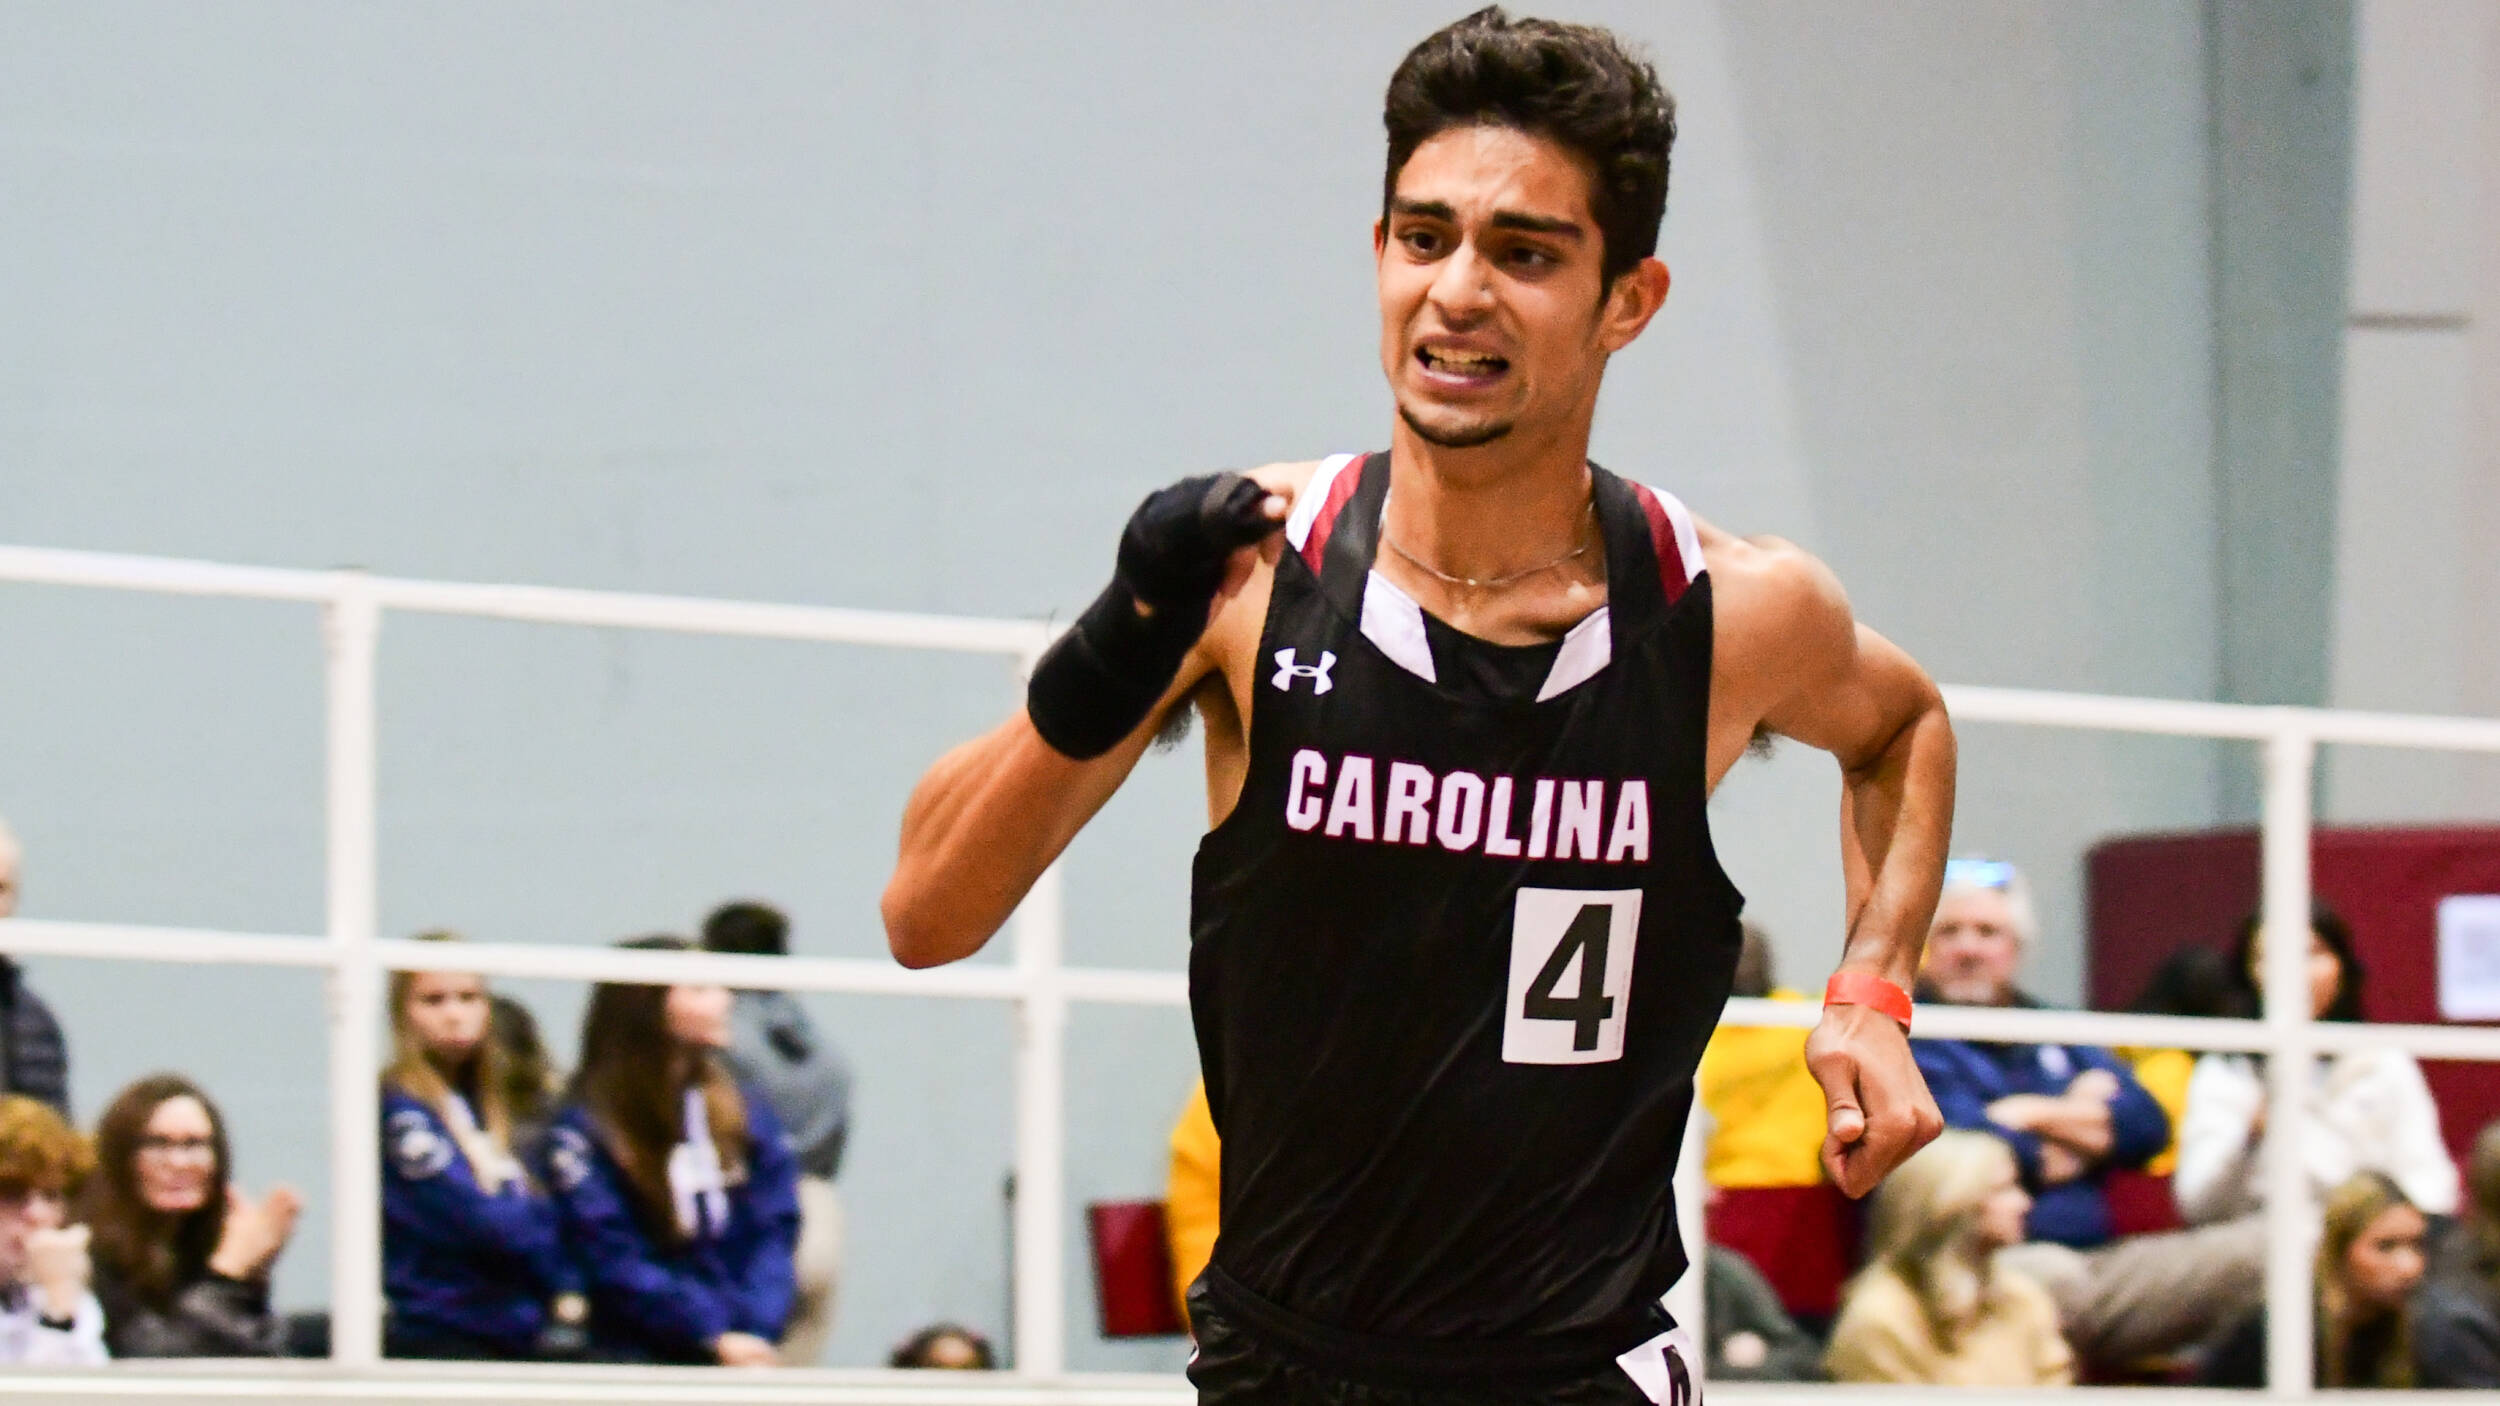 Gamecocks Yield Strong NCAA Marks in Final Day of Carolina Challenge